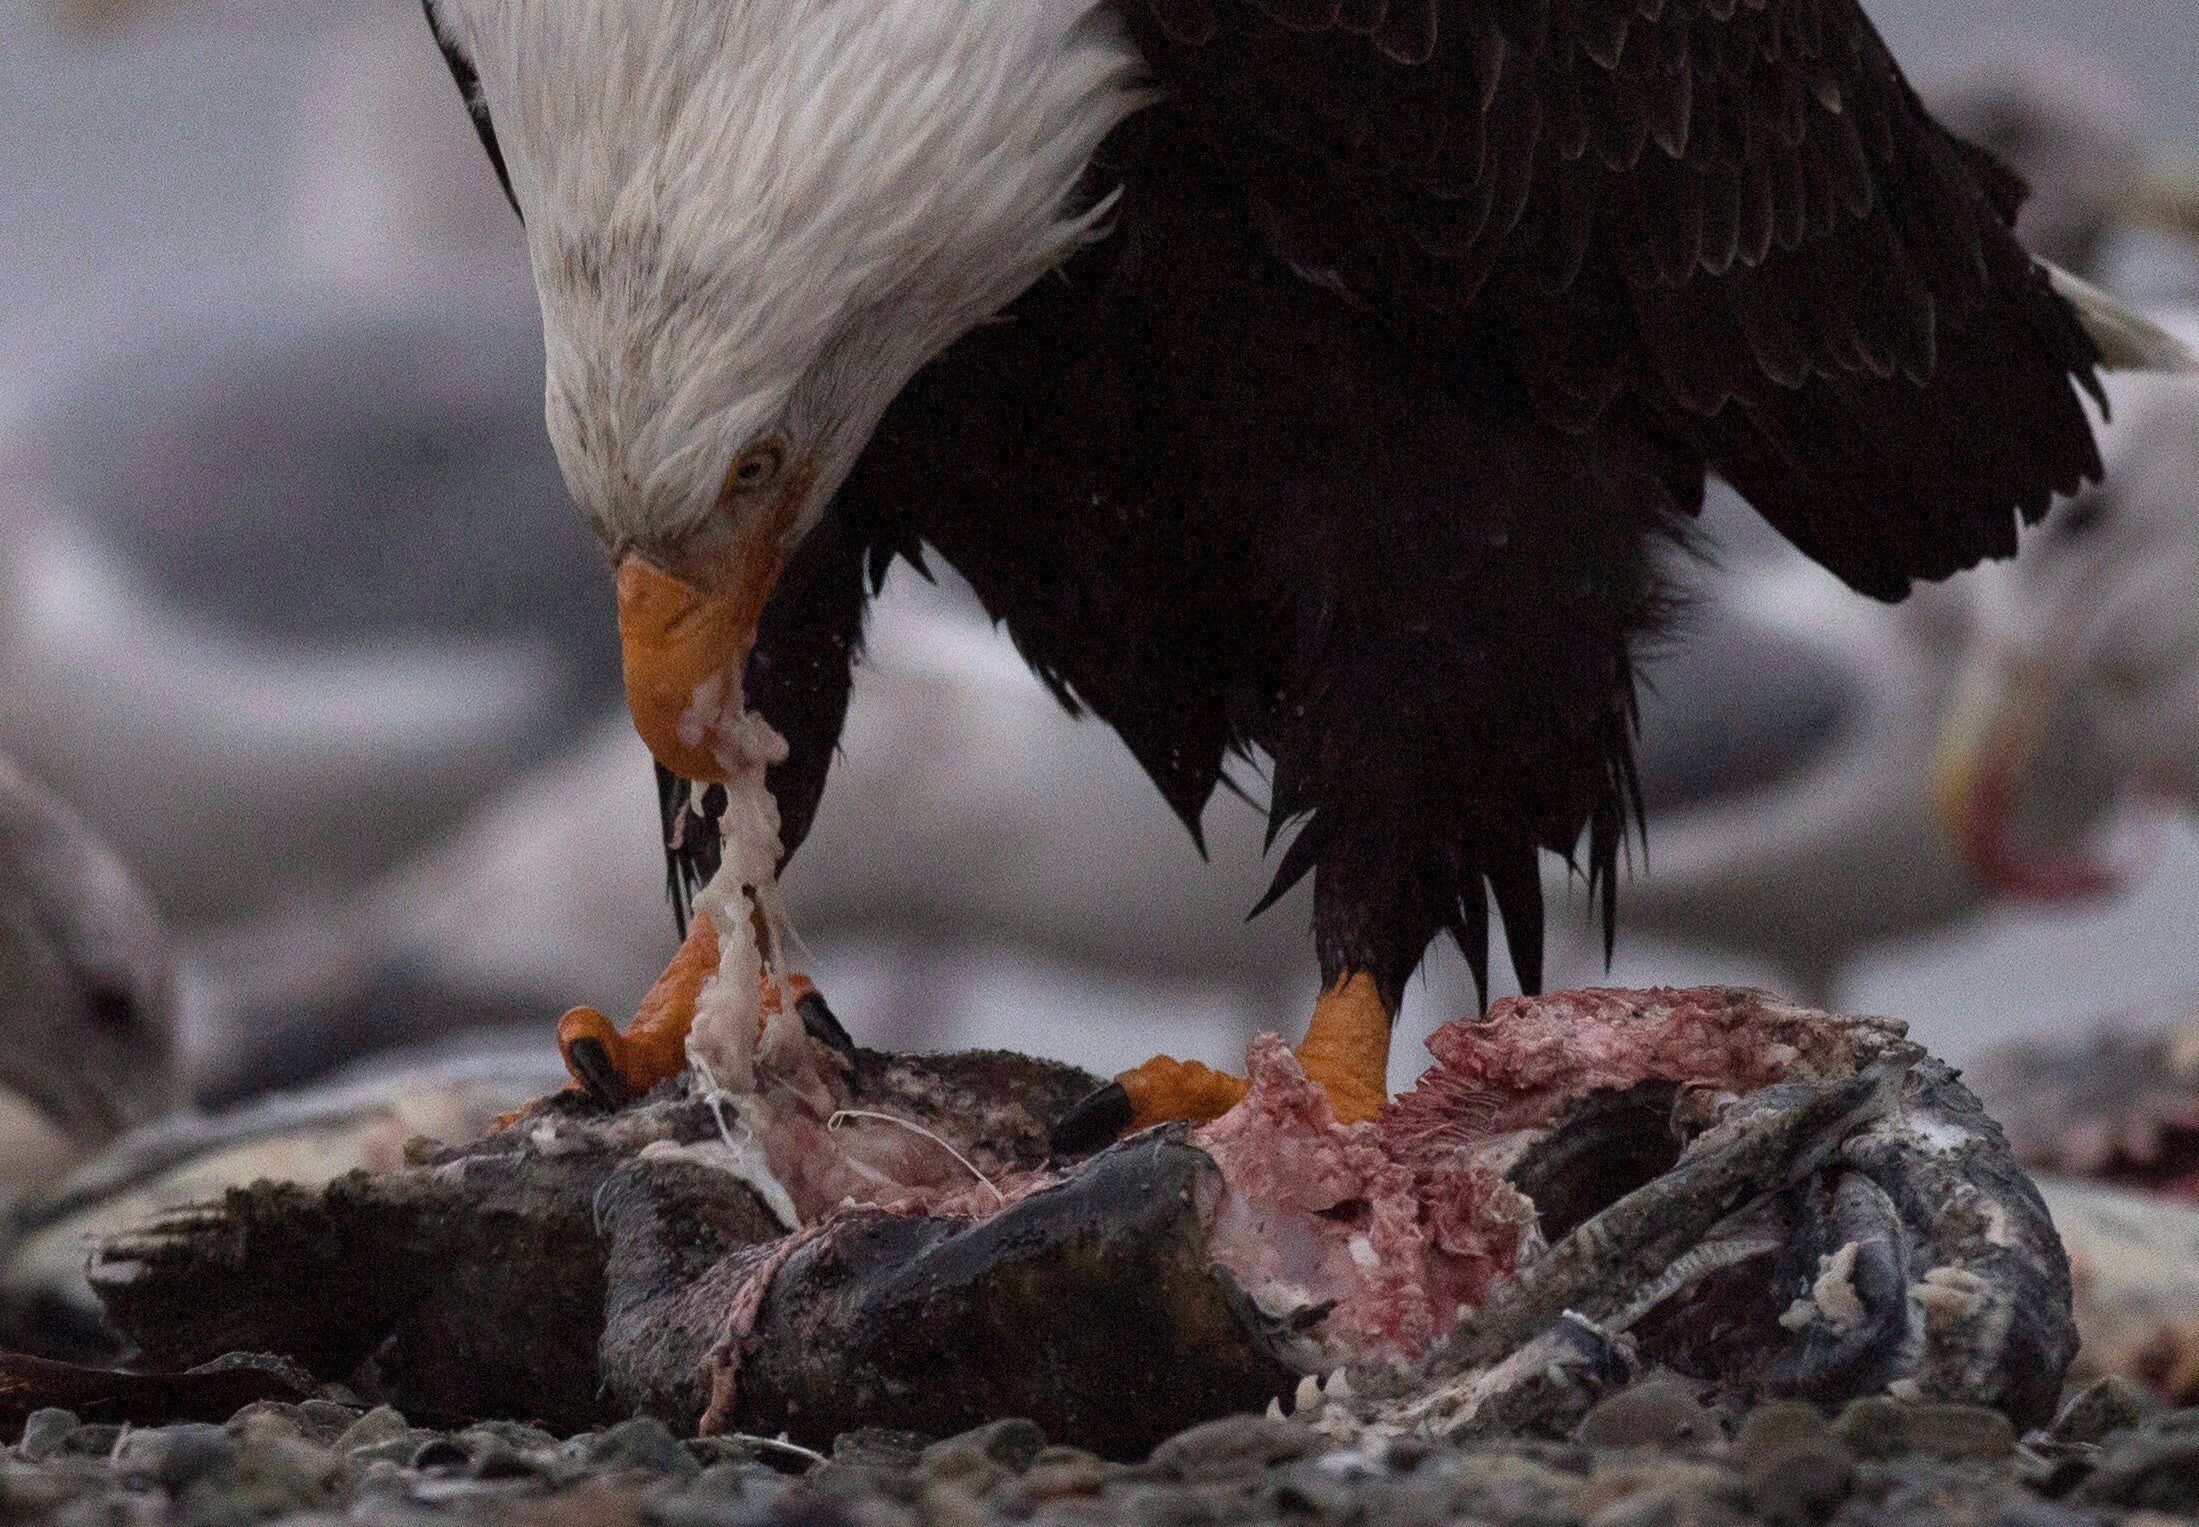 A bald eagle eating a chinook salmon along the Harrison River in Harrison Mills, British Columbia.